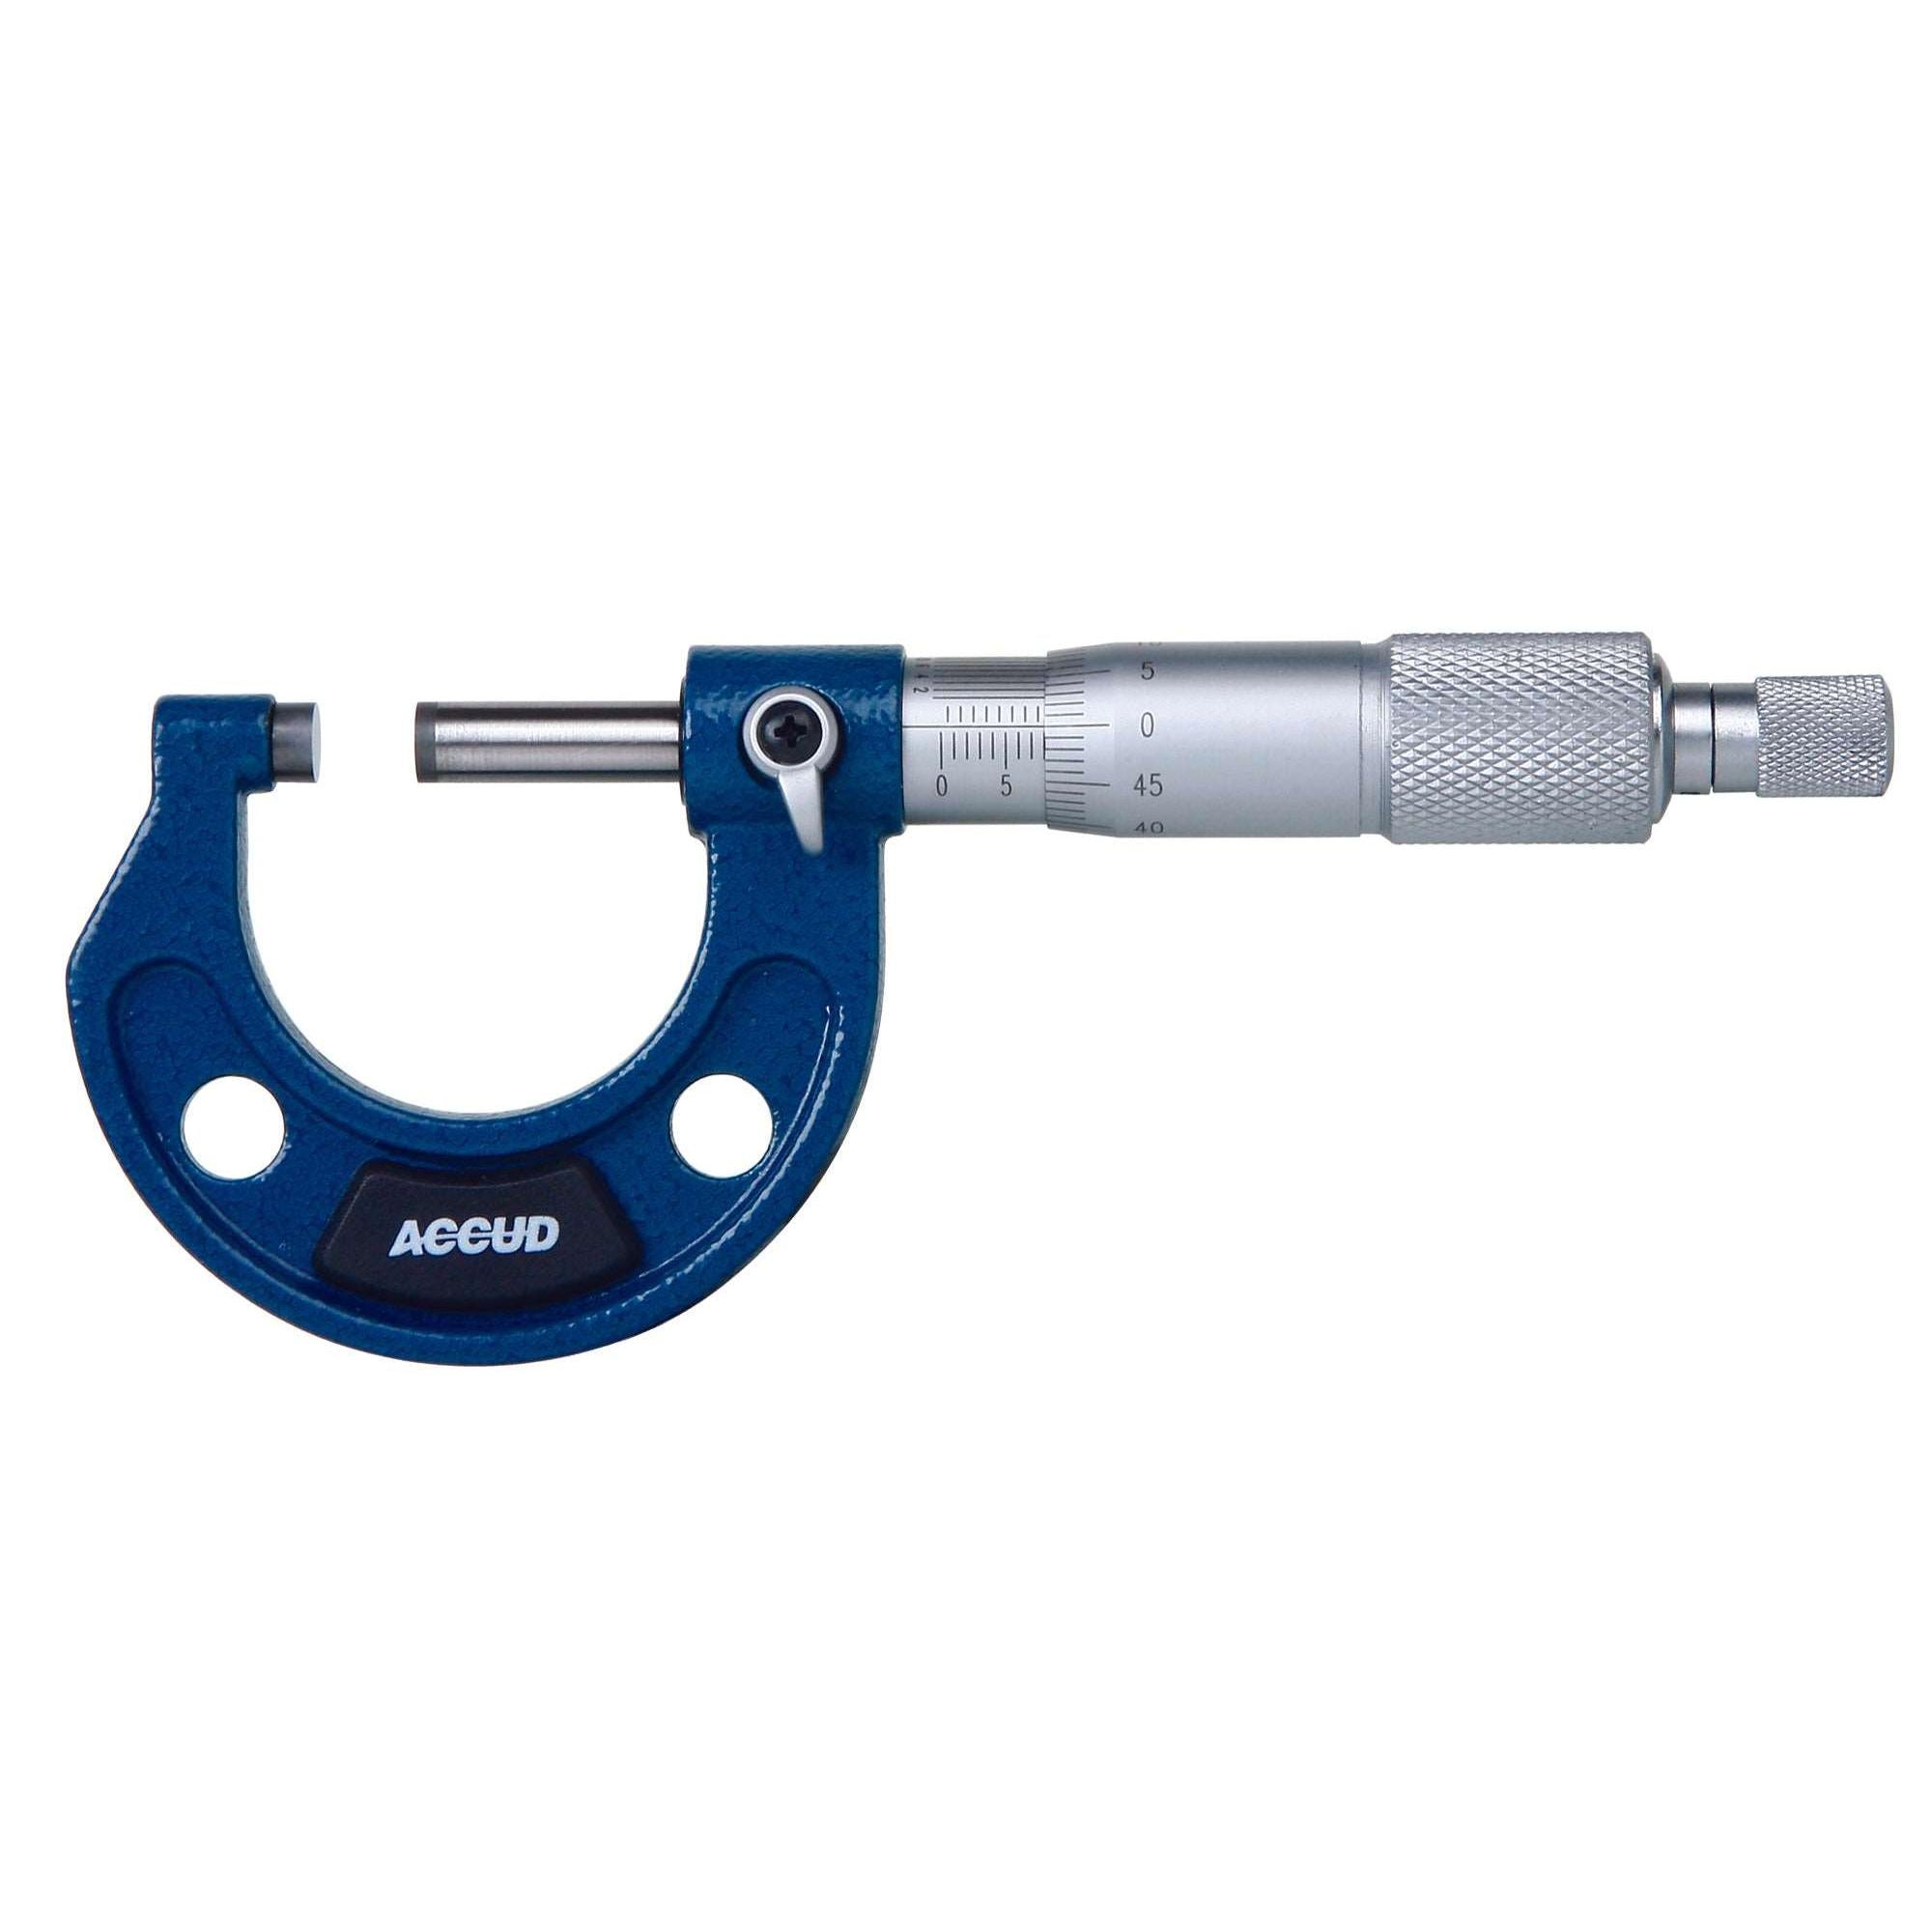 ACCUD | Outside Micrometer 75-100Mm | 321-004-01 Power Tool Services